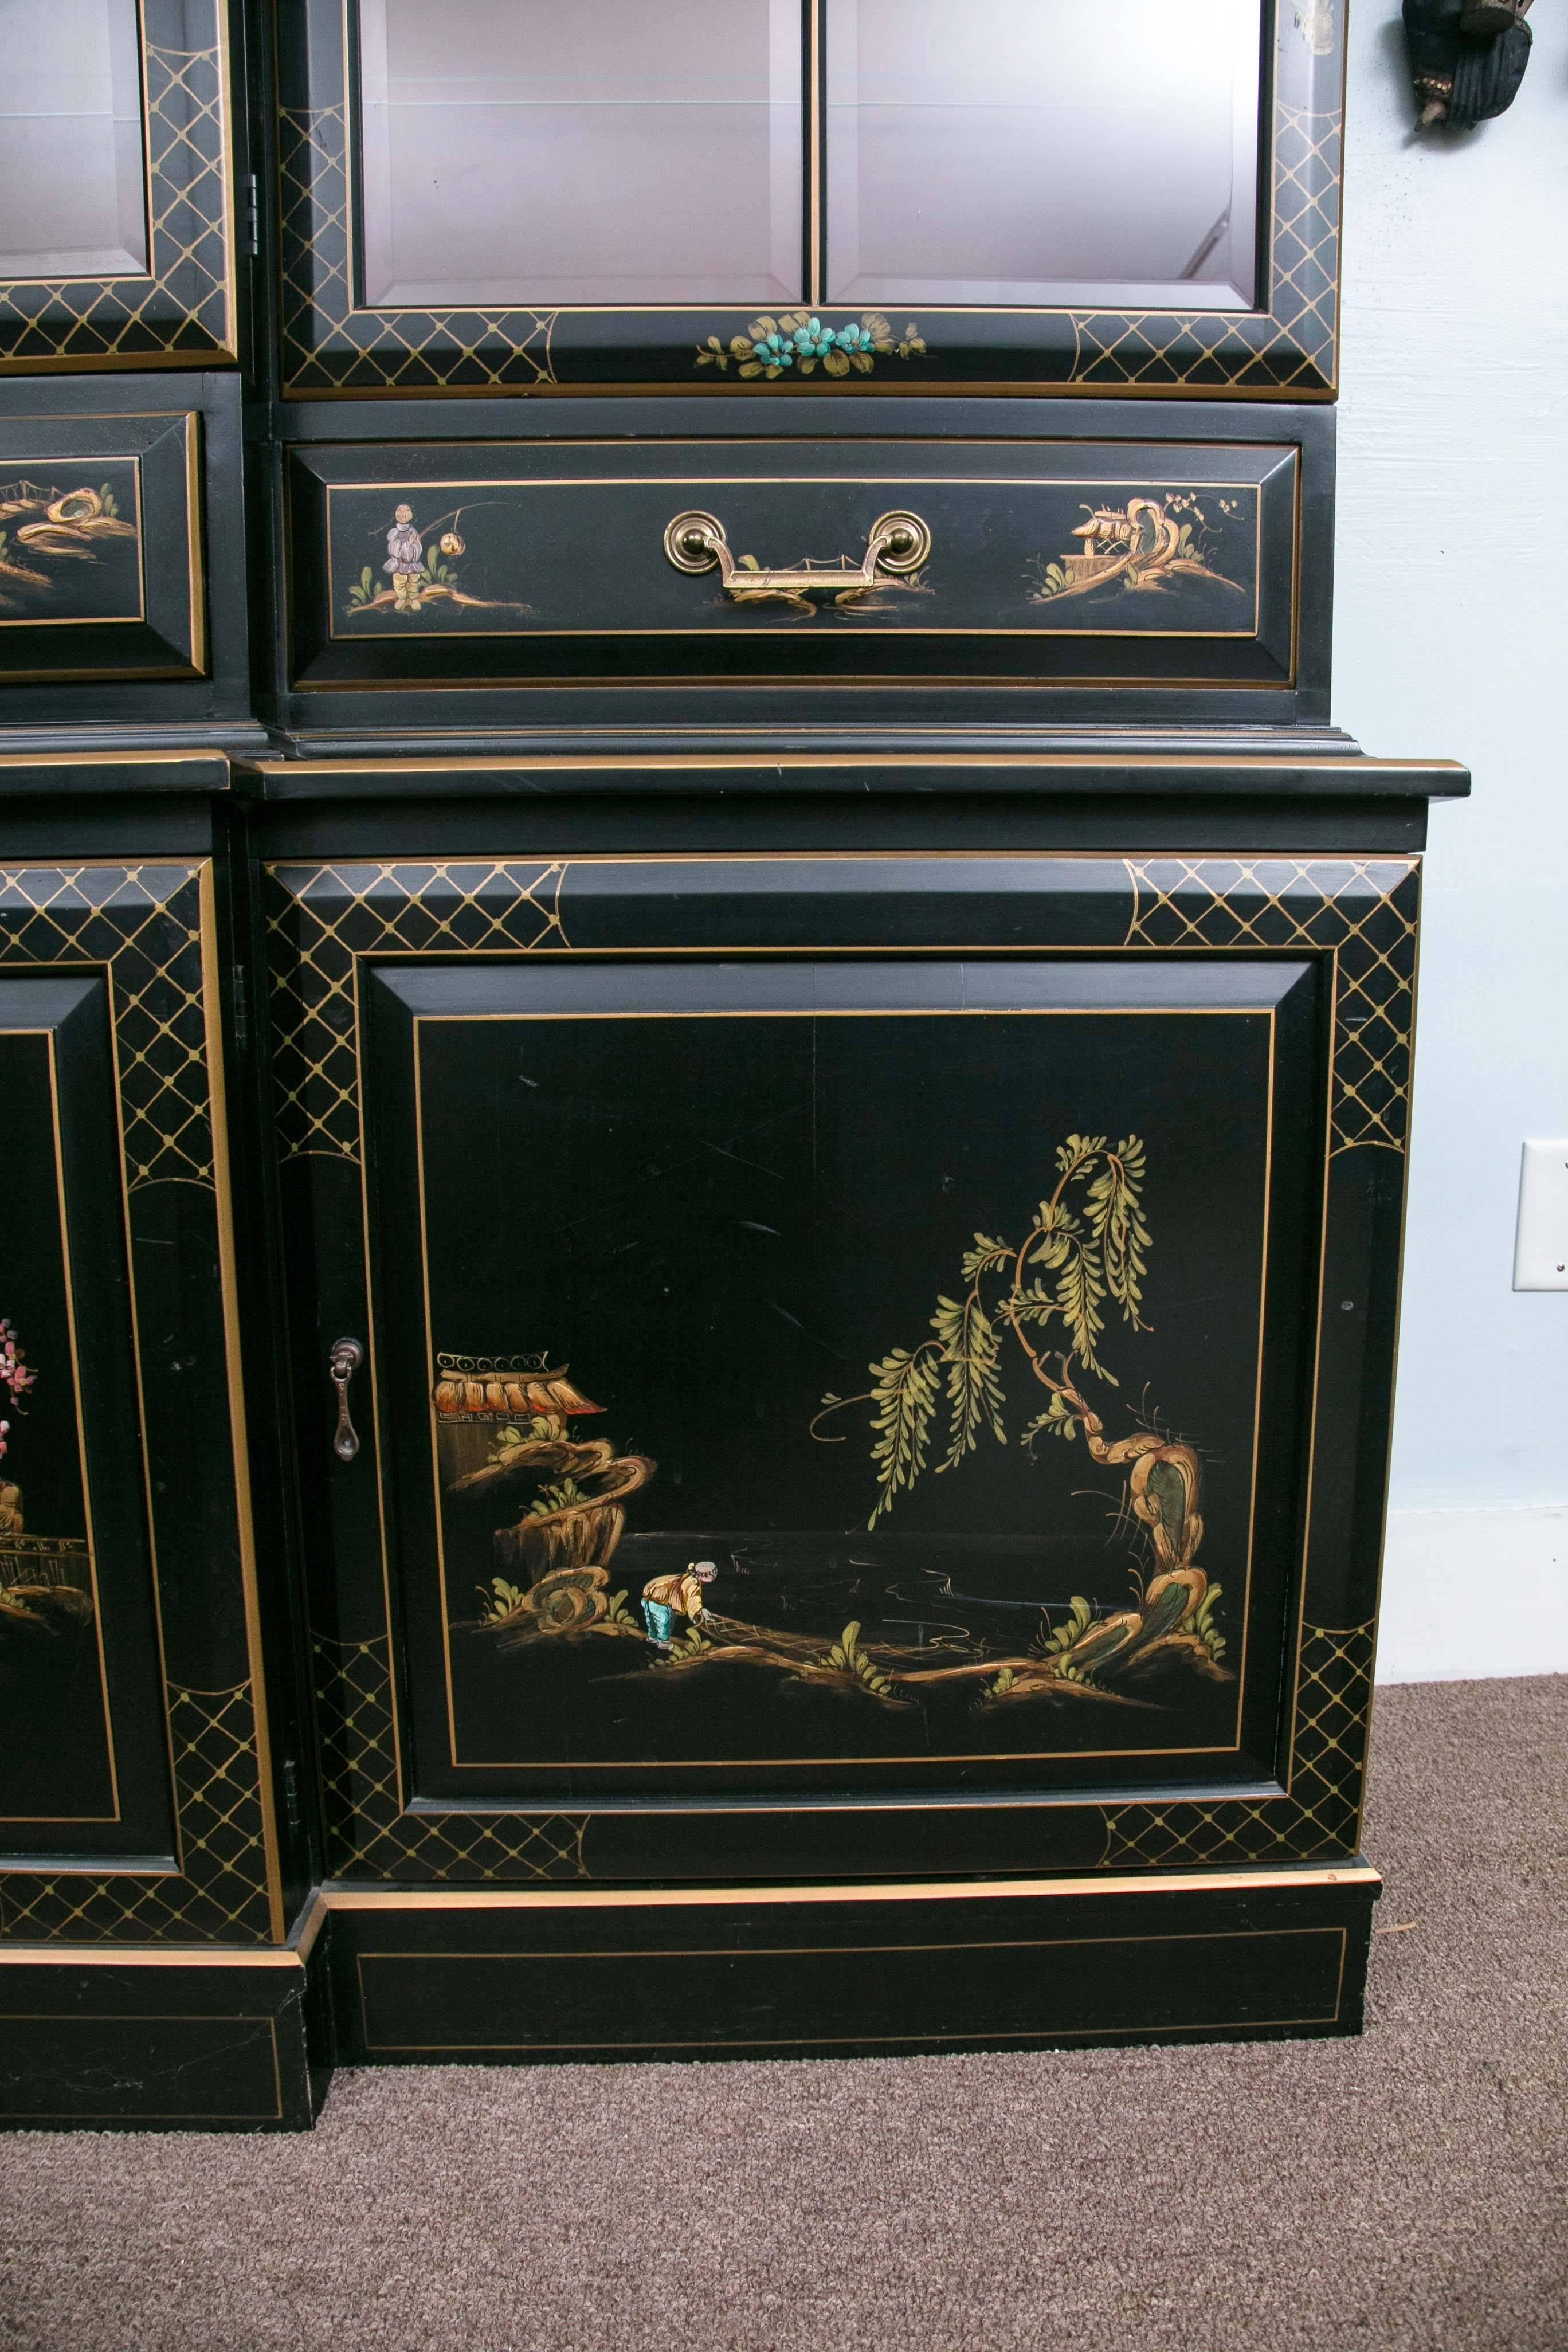 George III style Chinoiserie decorated black Japanned breakfront/bookcase. Beautiful Chinese Chippendale style library/dining room breakfront. Fabulous Feng Shui red lighted interior. Red being the color of Feng Shui Fire element, representing